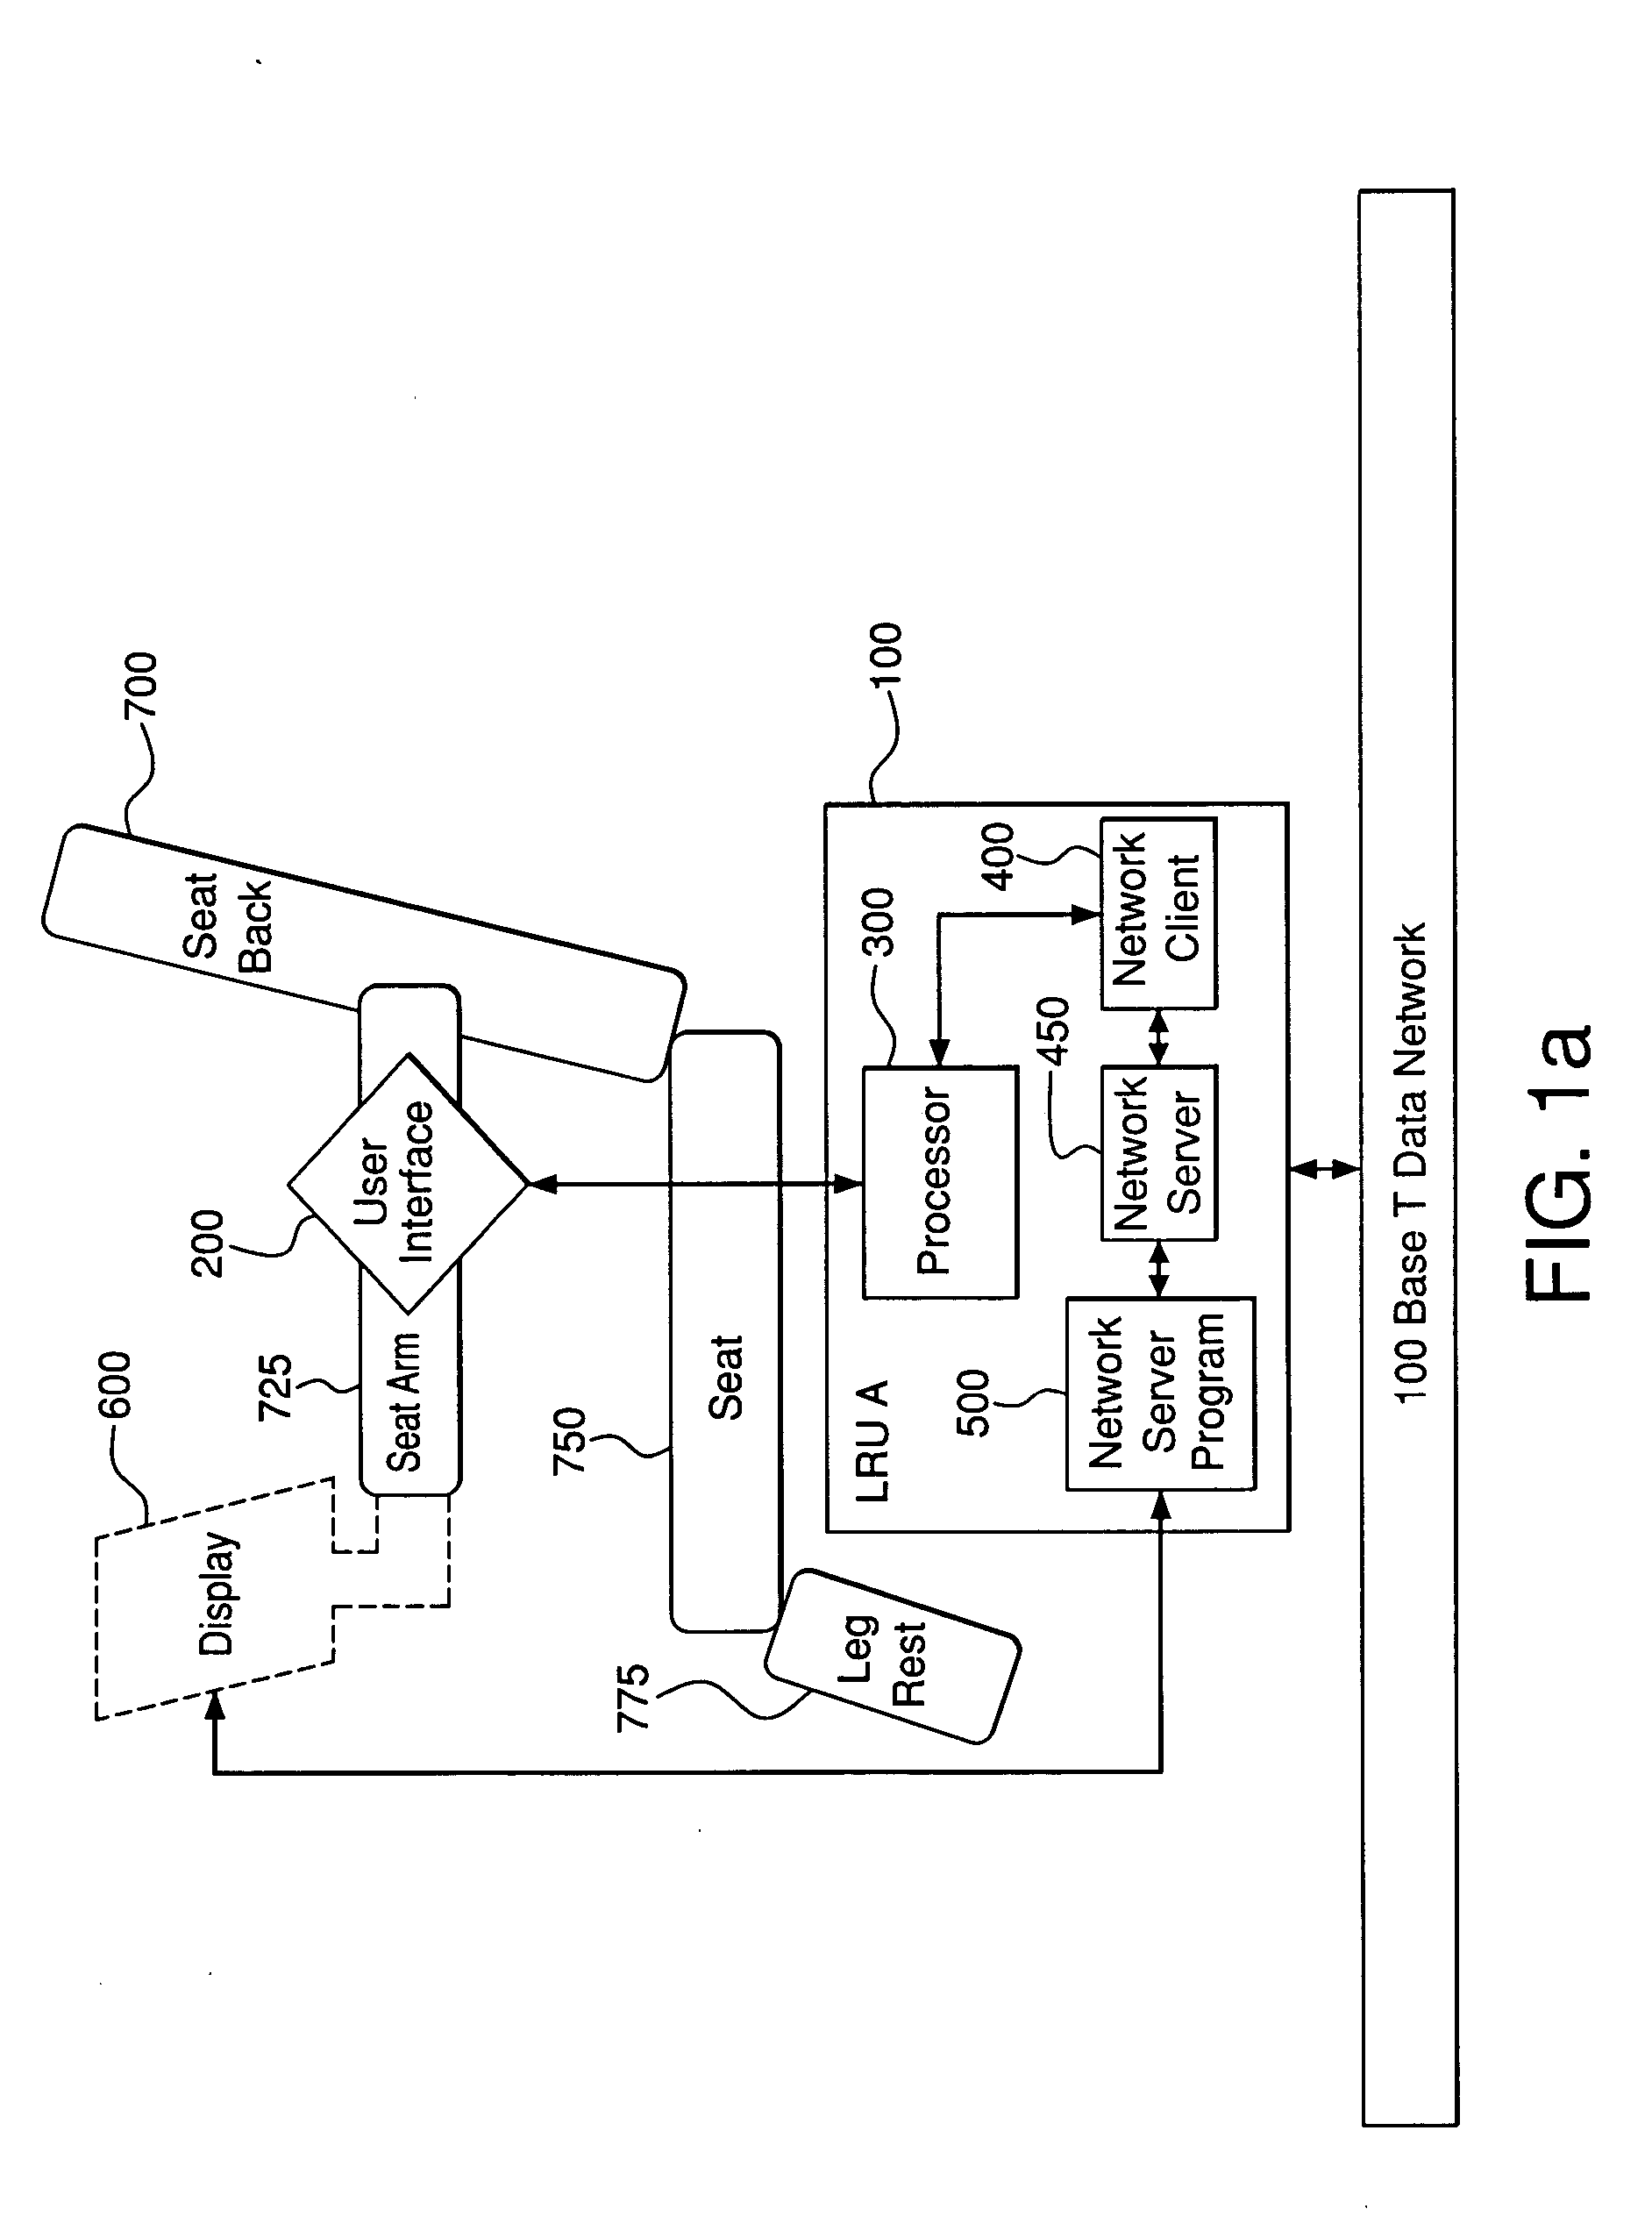 Broadcast passenger flight information system and method for using the same